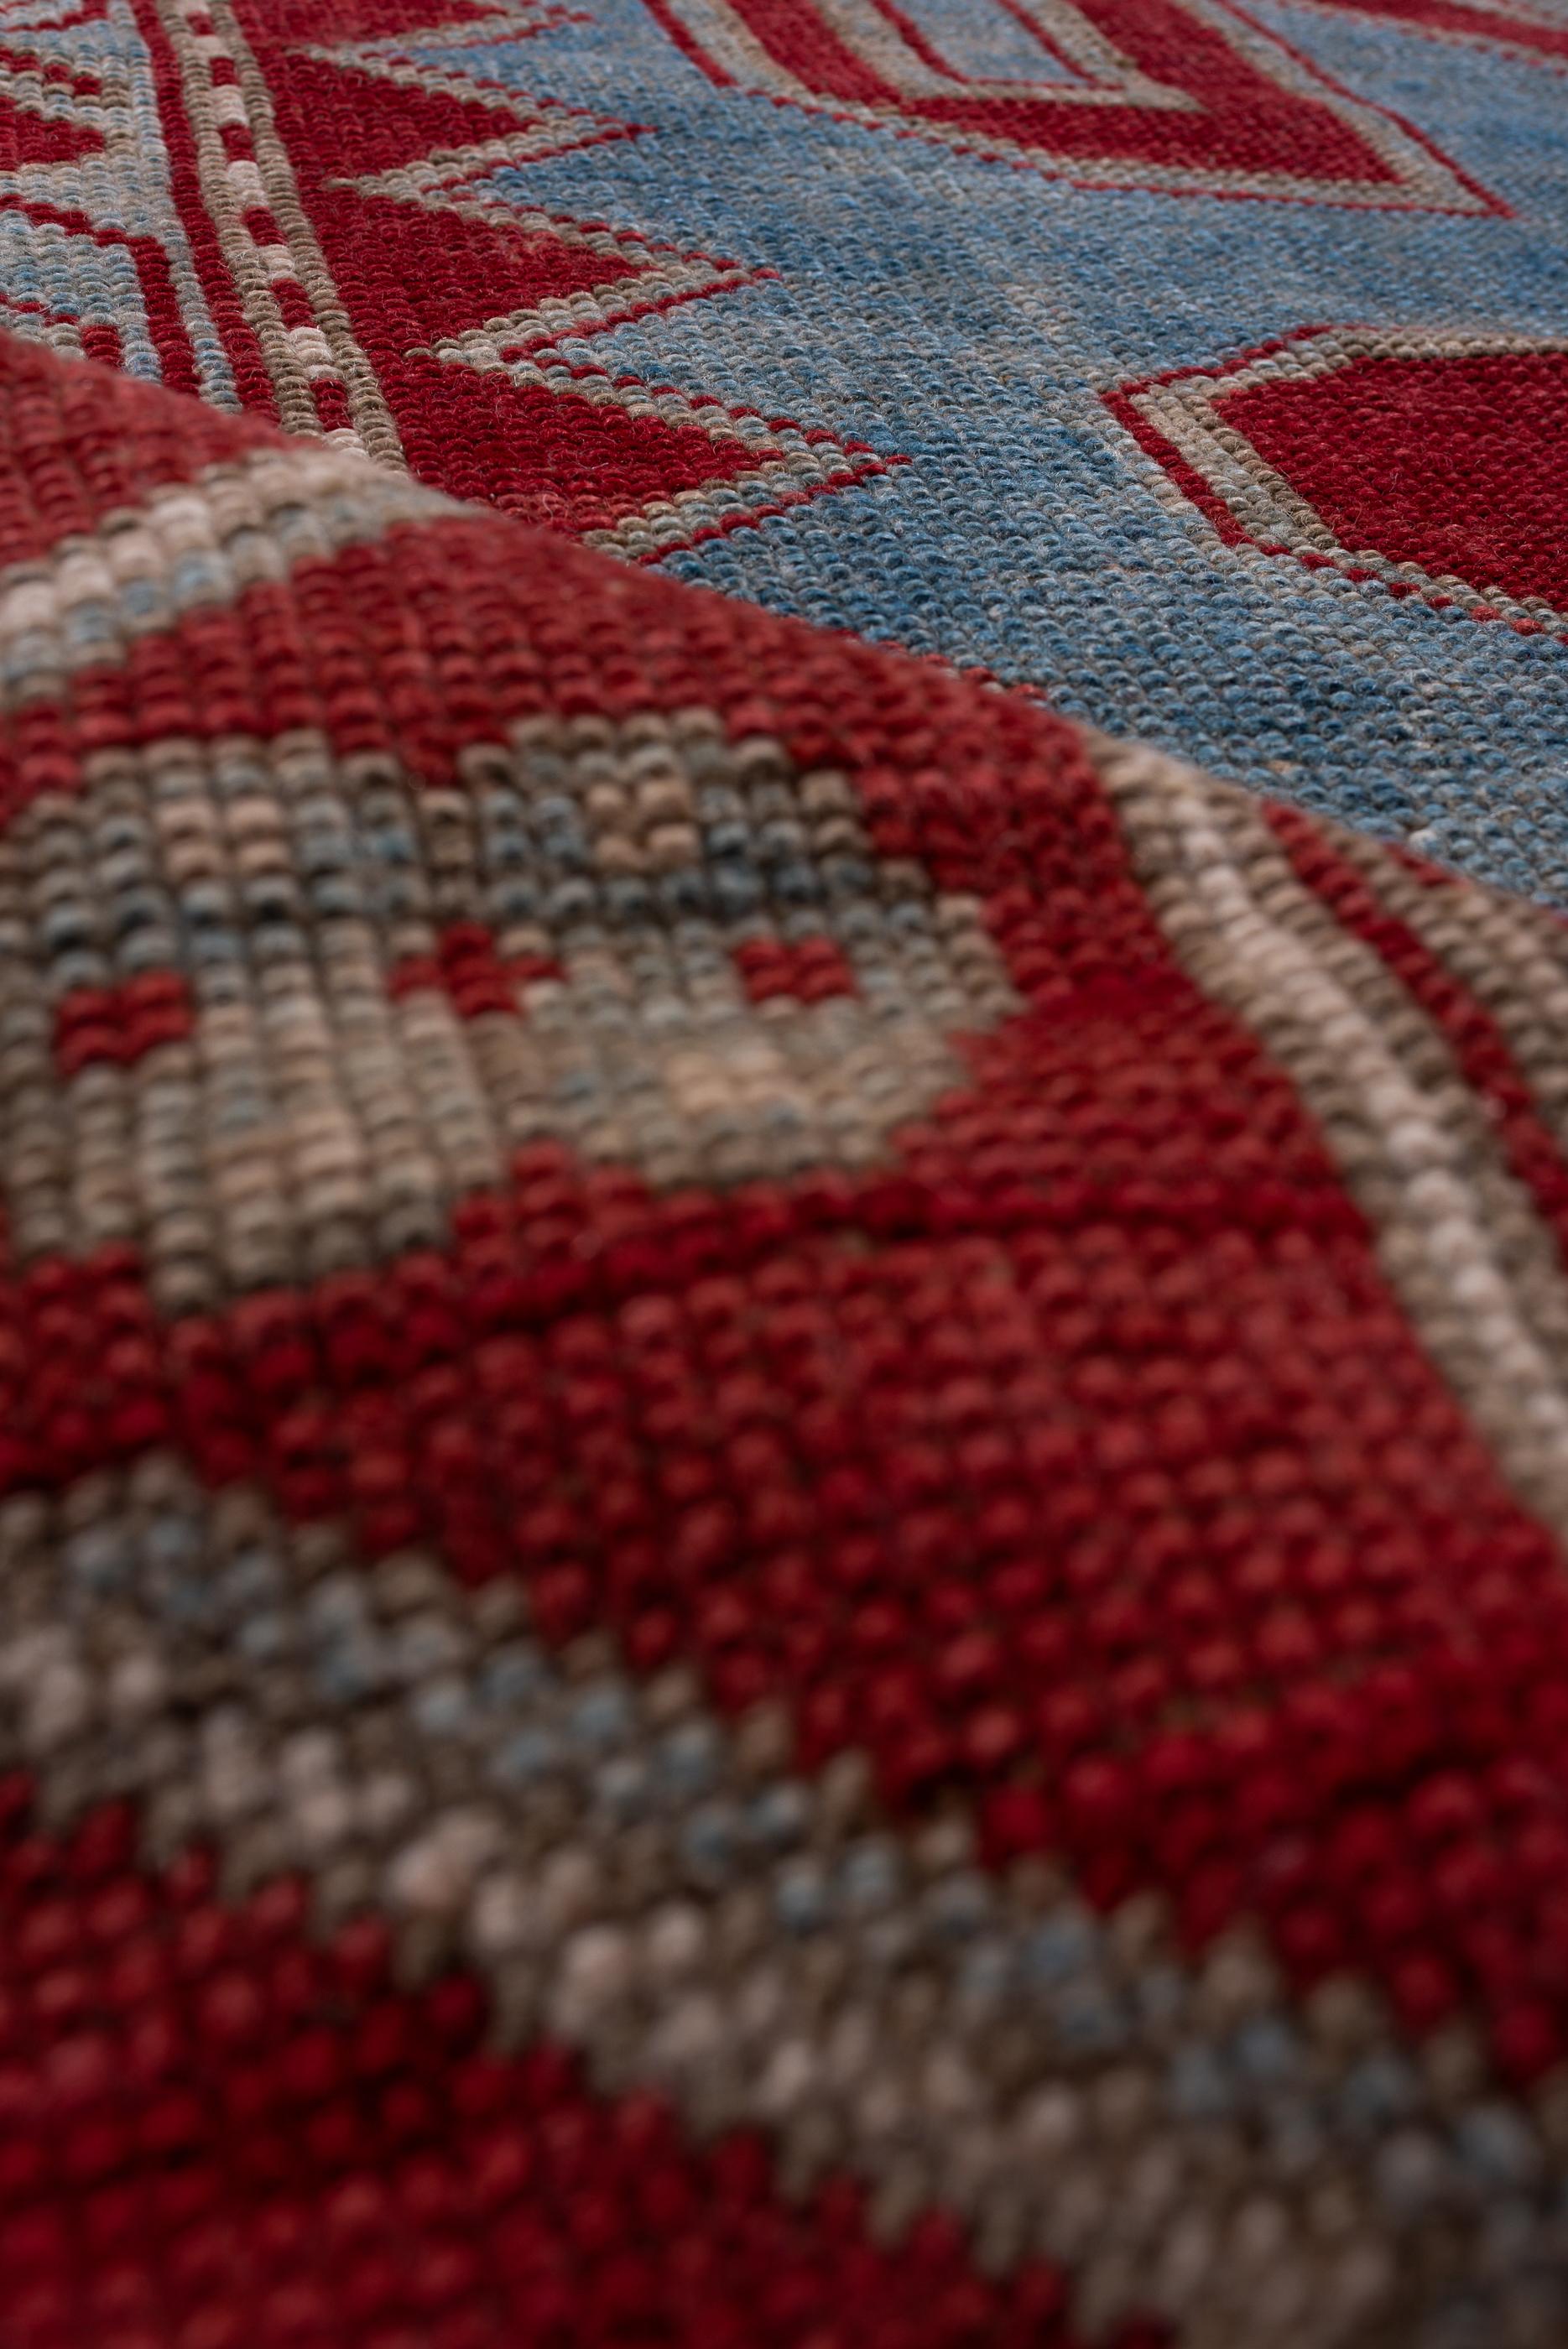 Wool Antique Kazak Rug with Bold Red Border and Blue Field